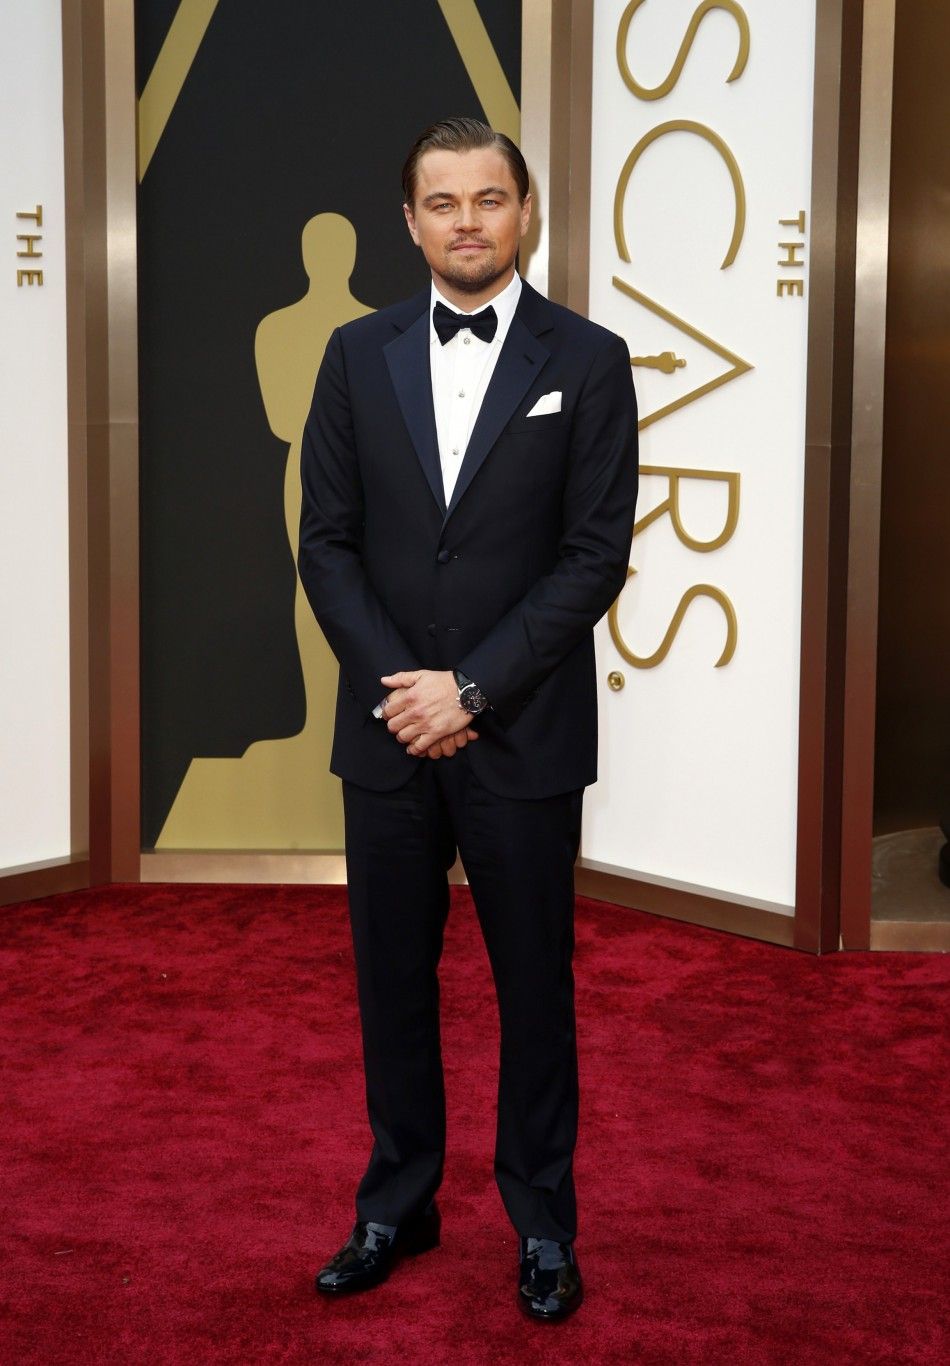 Leonardo DiCaprio, best actor nominee for his role in the film quotThe Wolf of Wall Streetquot, arrives at the 86th Academy Awards in Hollywood